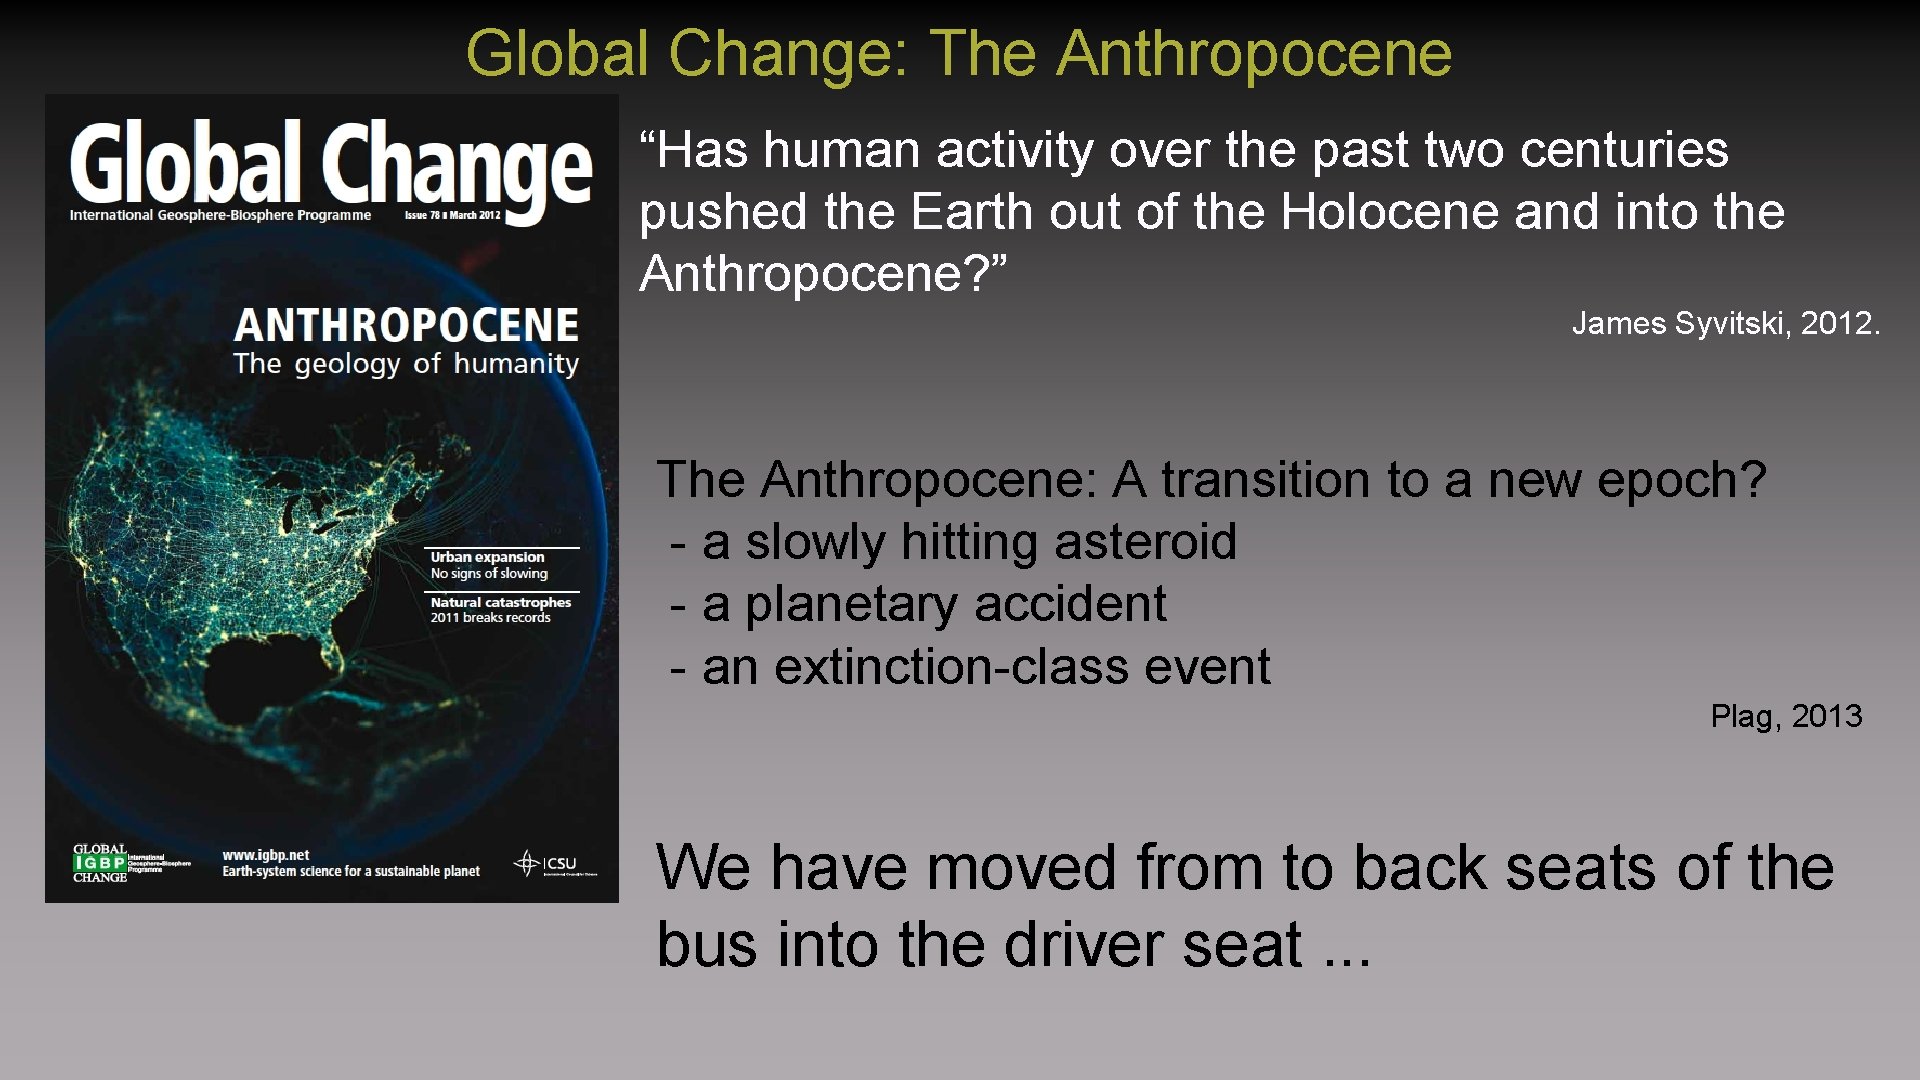 Global Change: The Anthropocene “Has human activity over the past two centuries pushed the